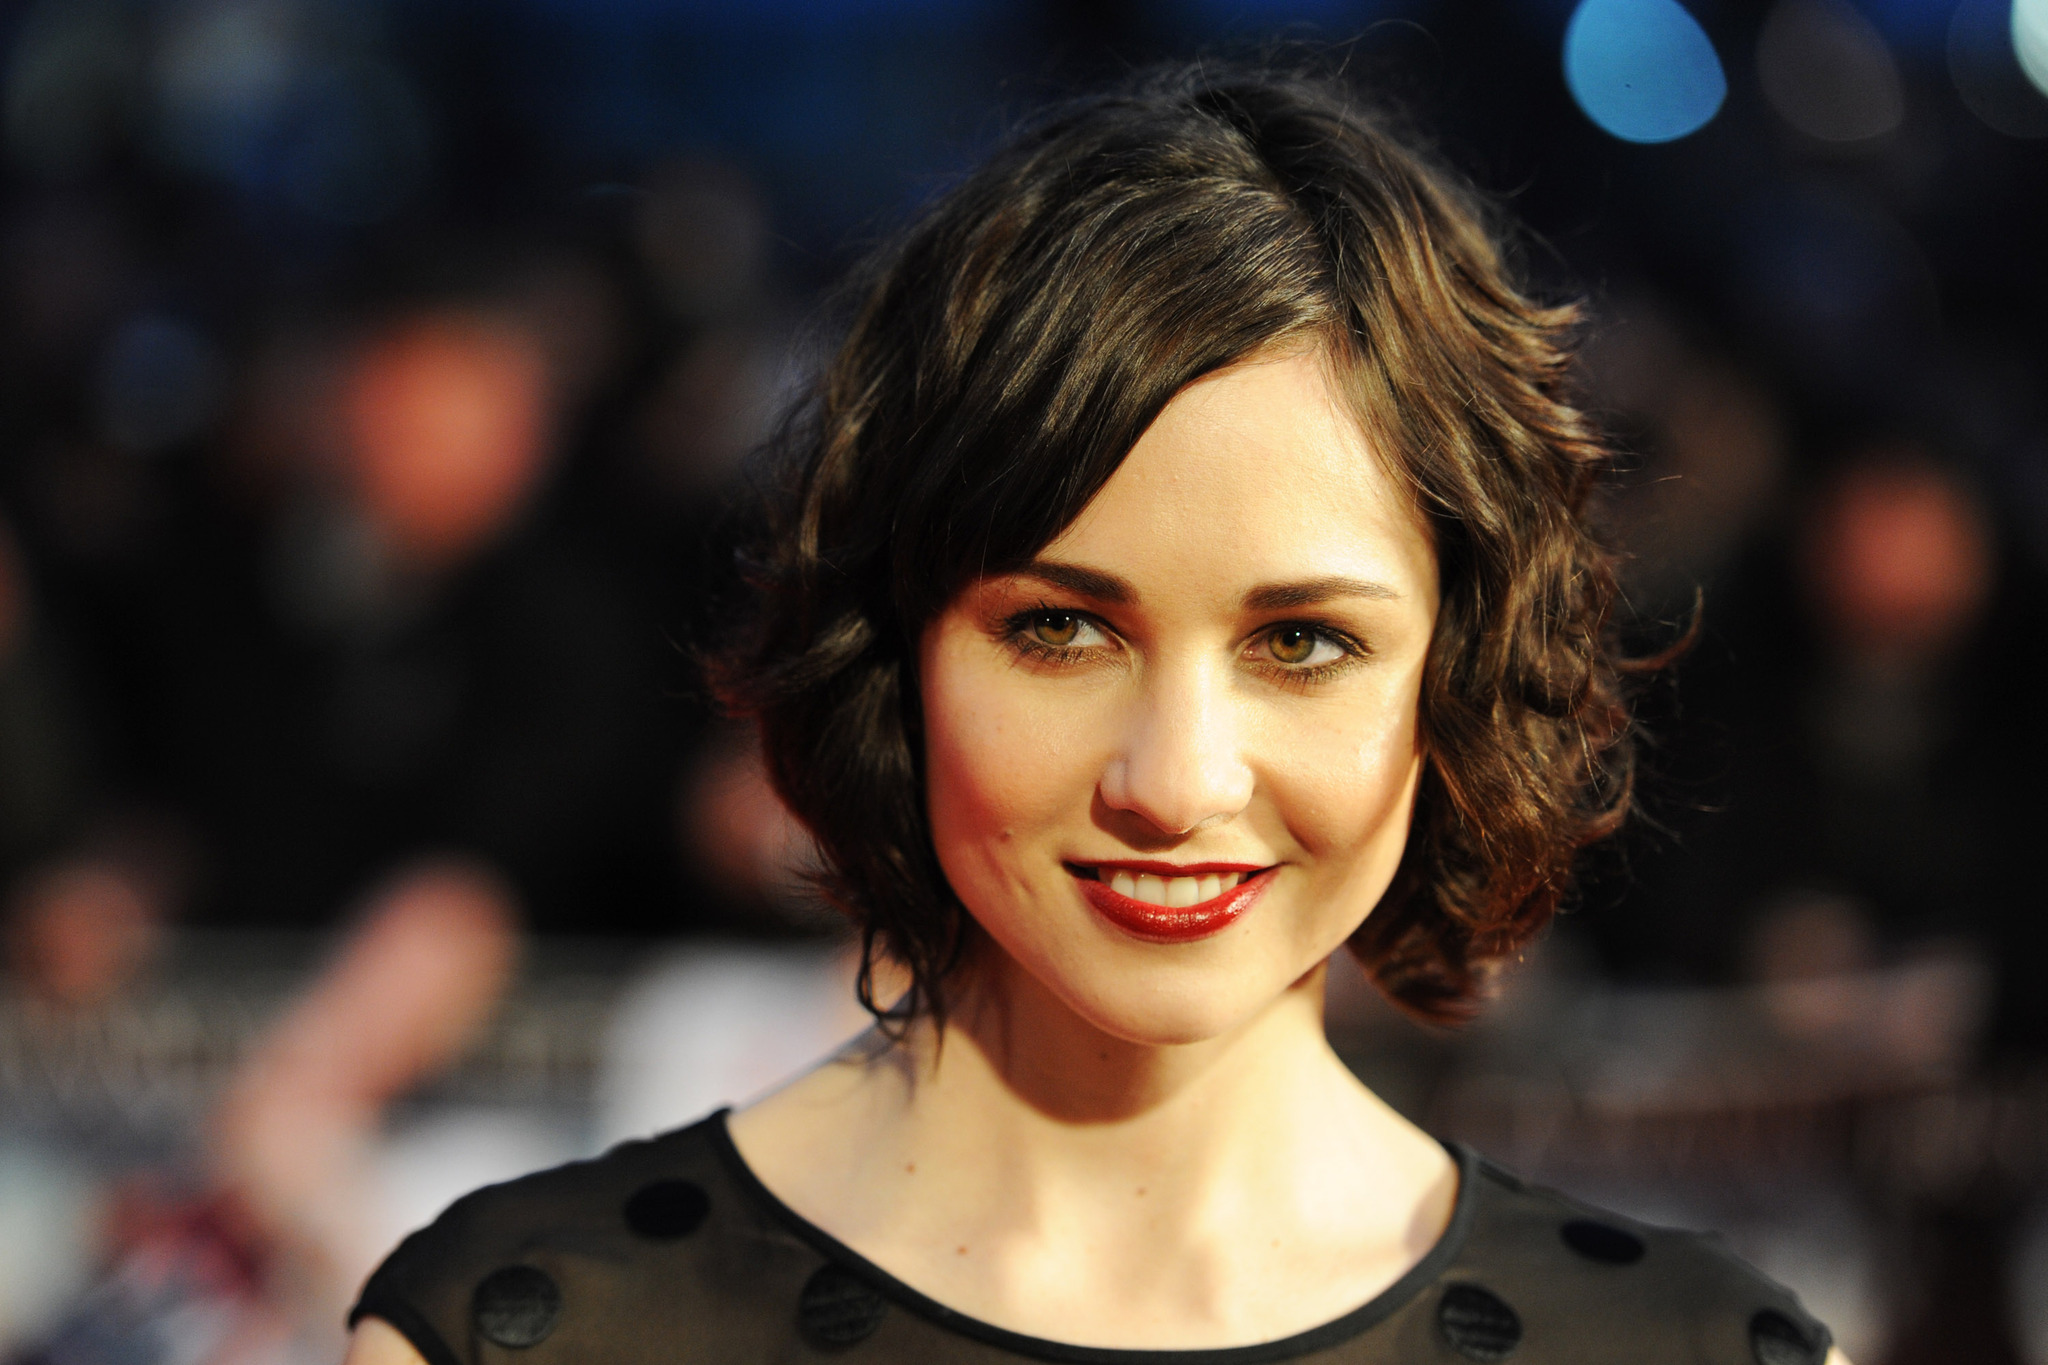 Tuppence Middleton at event of Transo busena (2013)